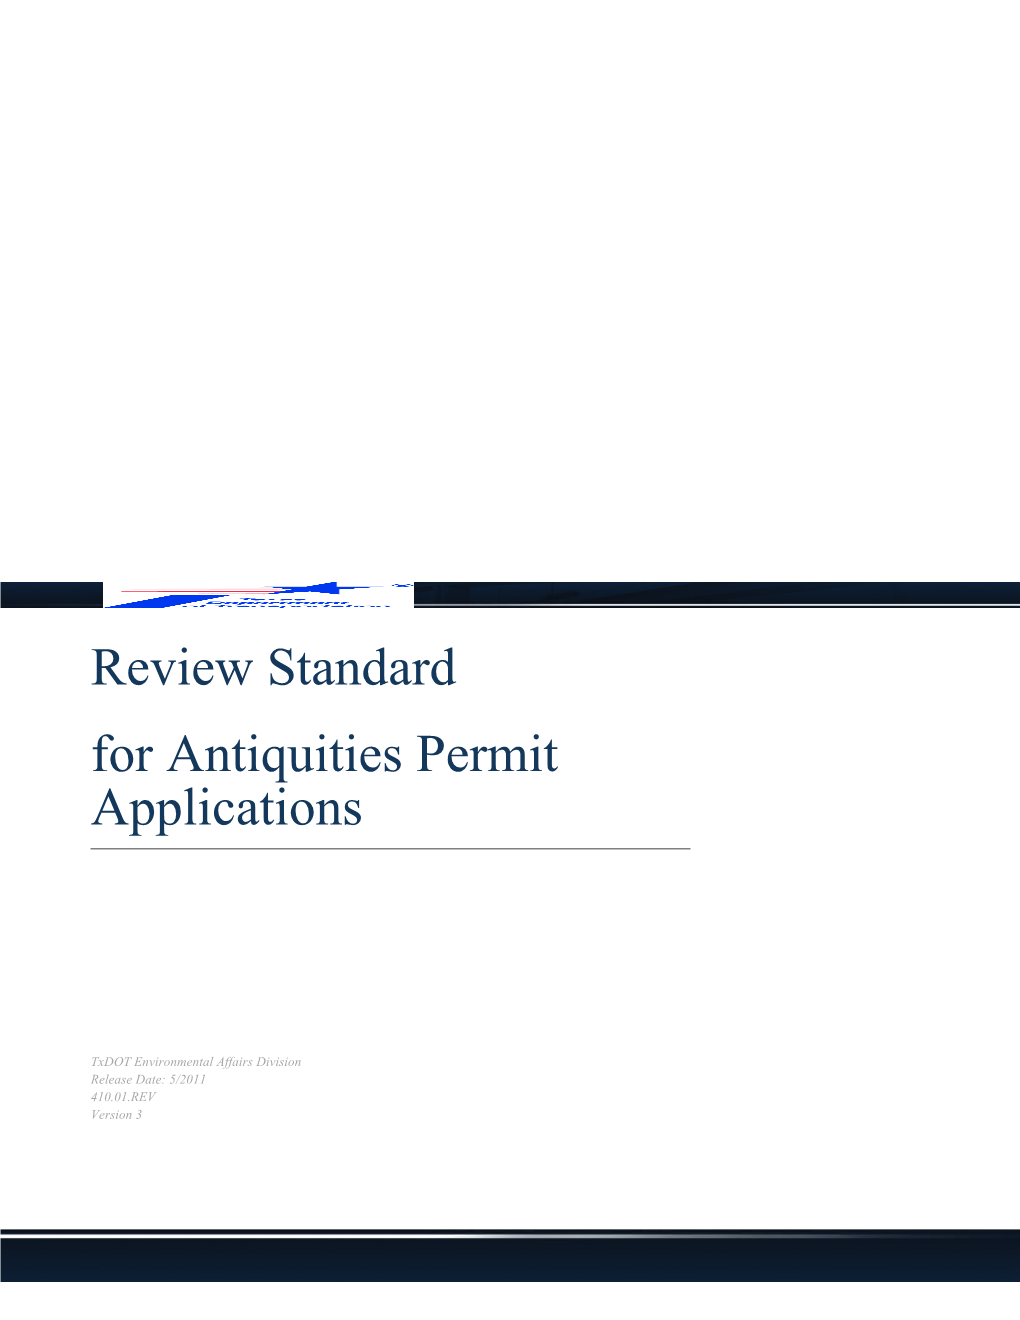 Review Standard For For Antiquities Permit Applications